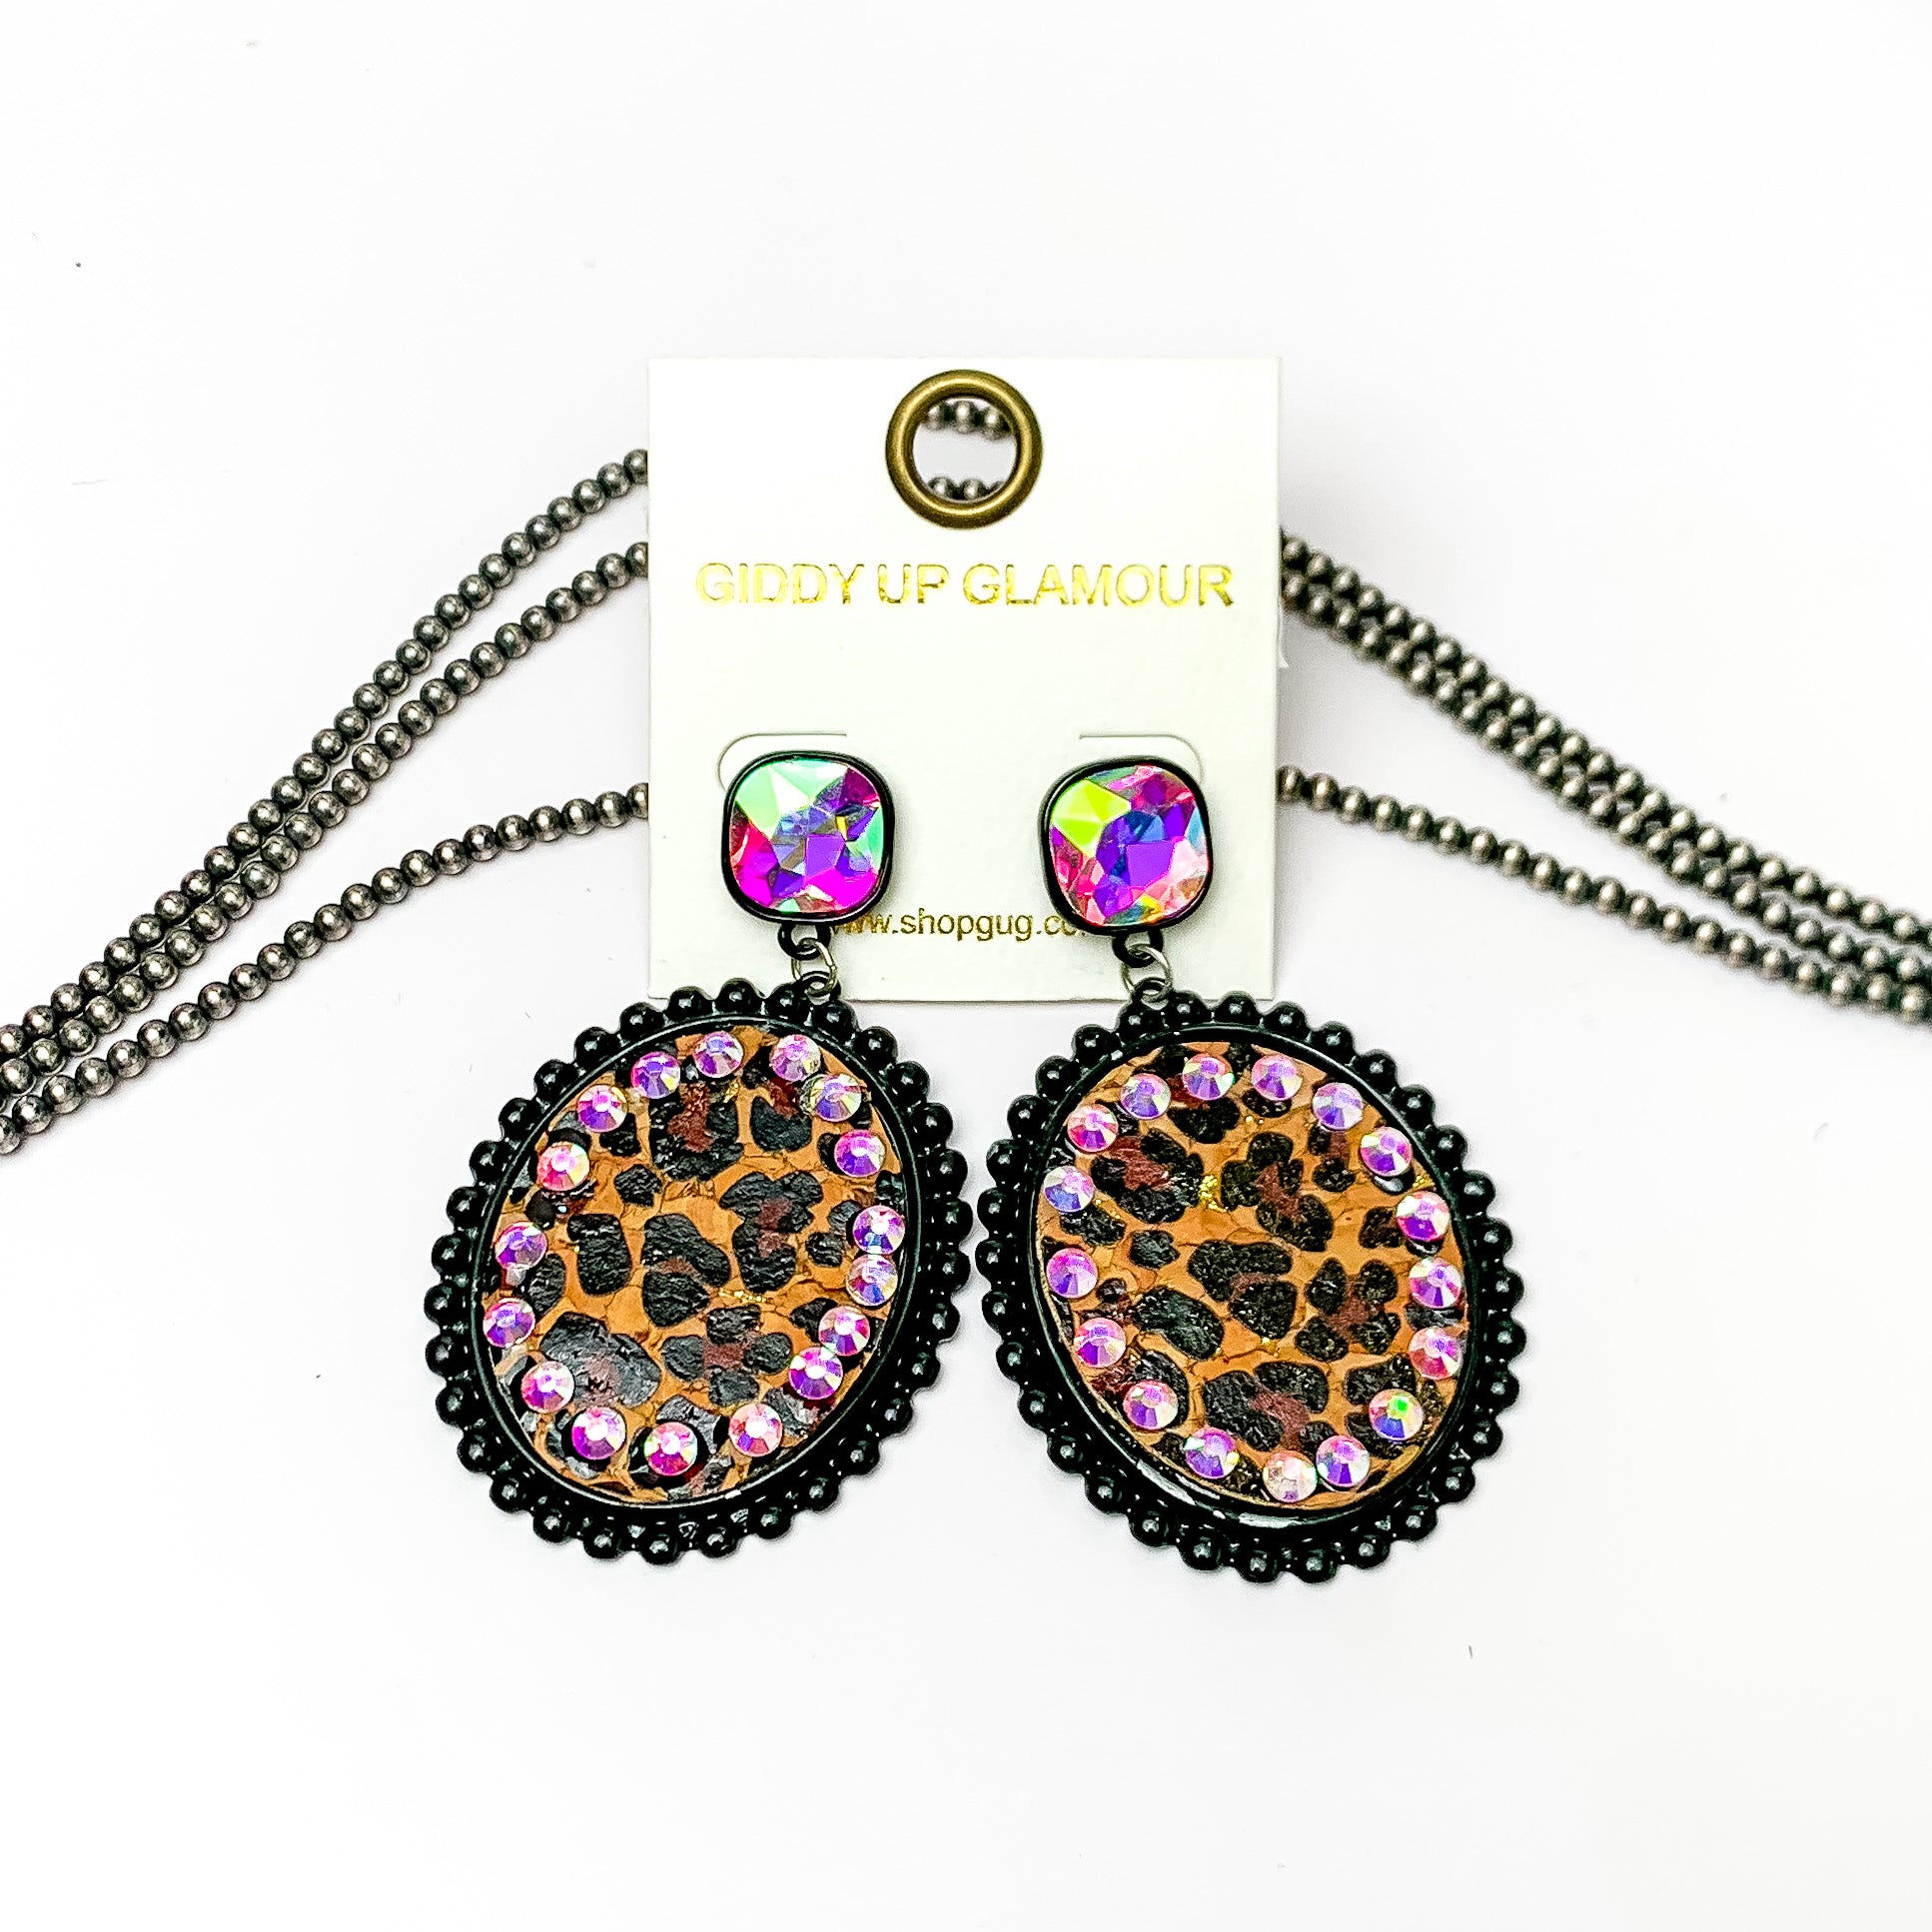 These earrings are oval shaped with leopard print inlay with the outline of the earing is black but also has ab crystal going around the oval shape. These pair of earrings also have a ab crystal post style earring. Pictured on a white background with navajo pearls behind it.